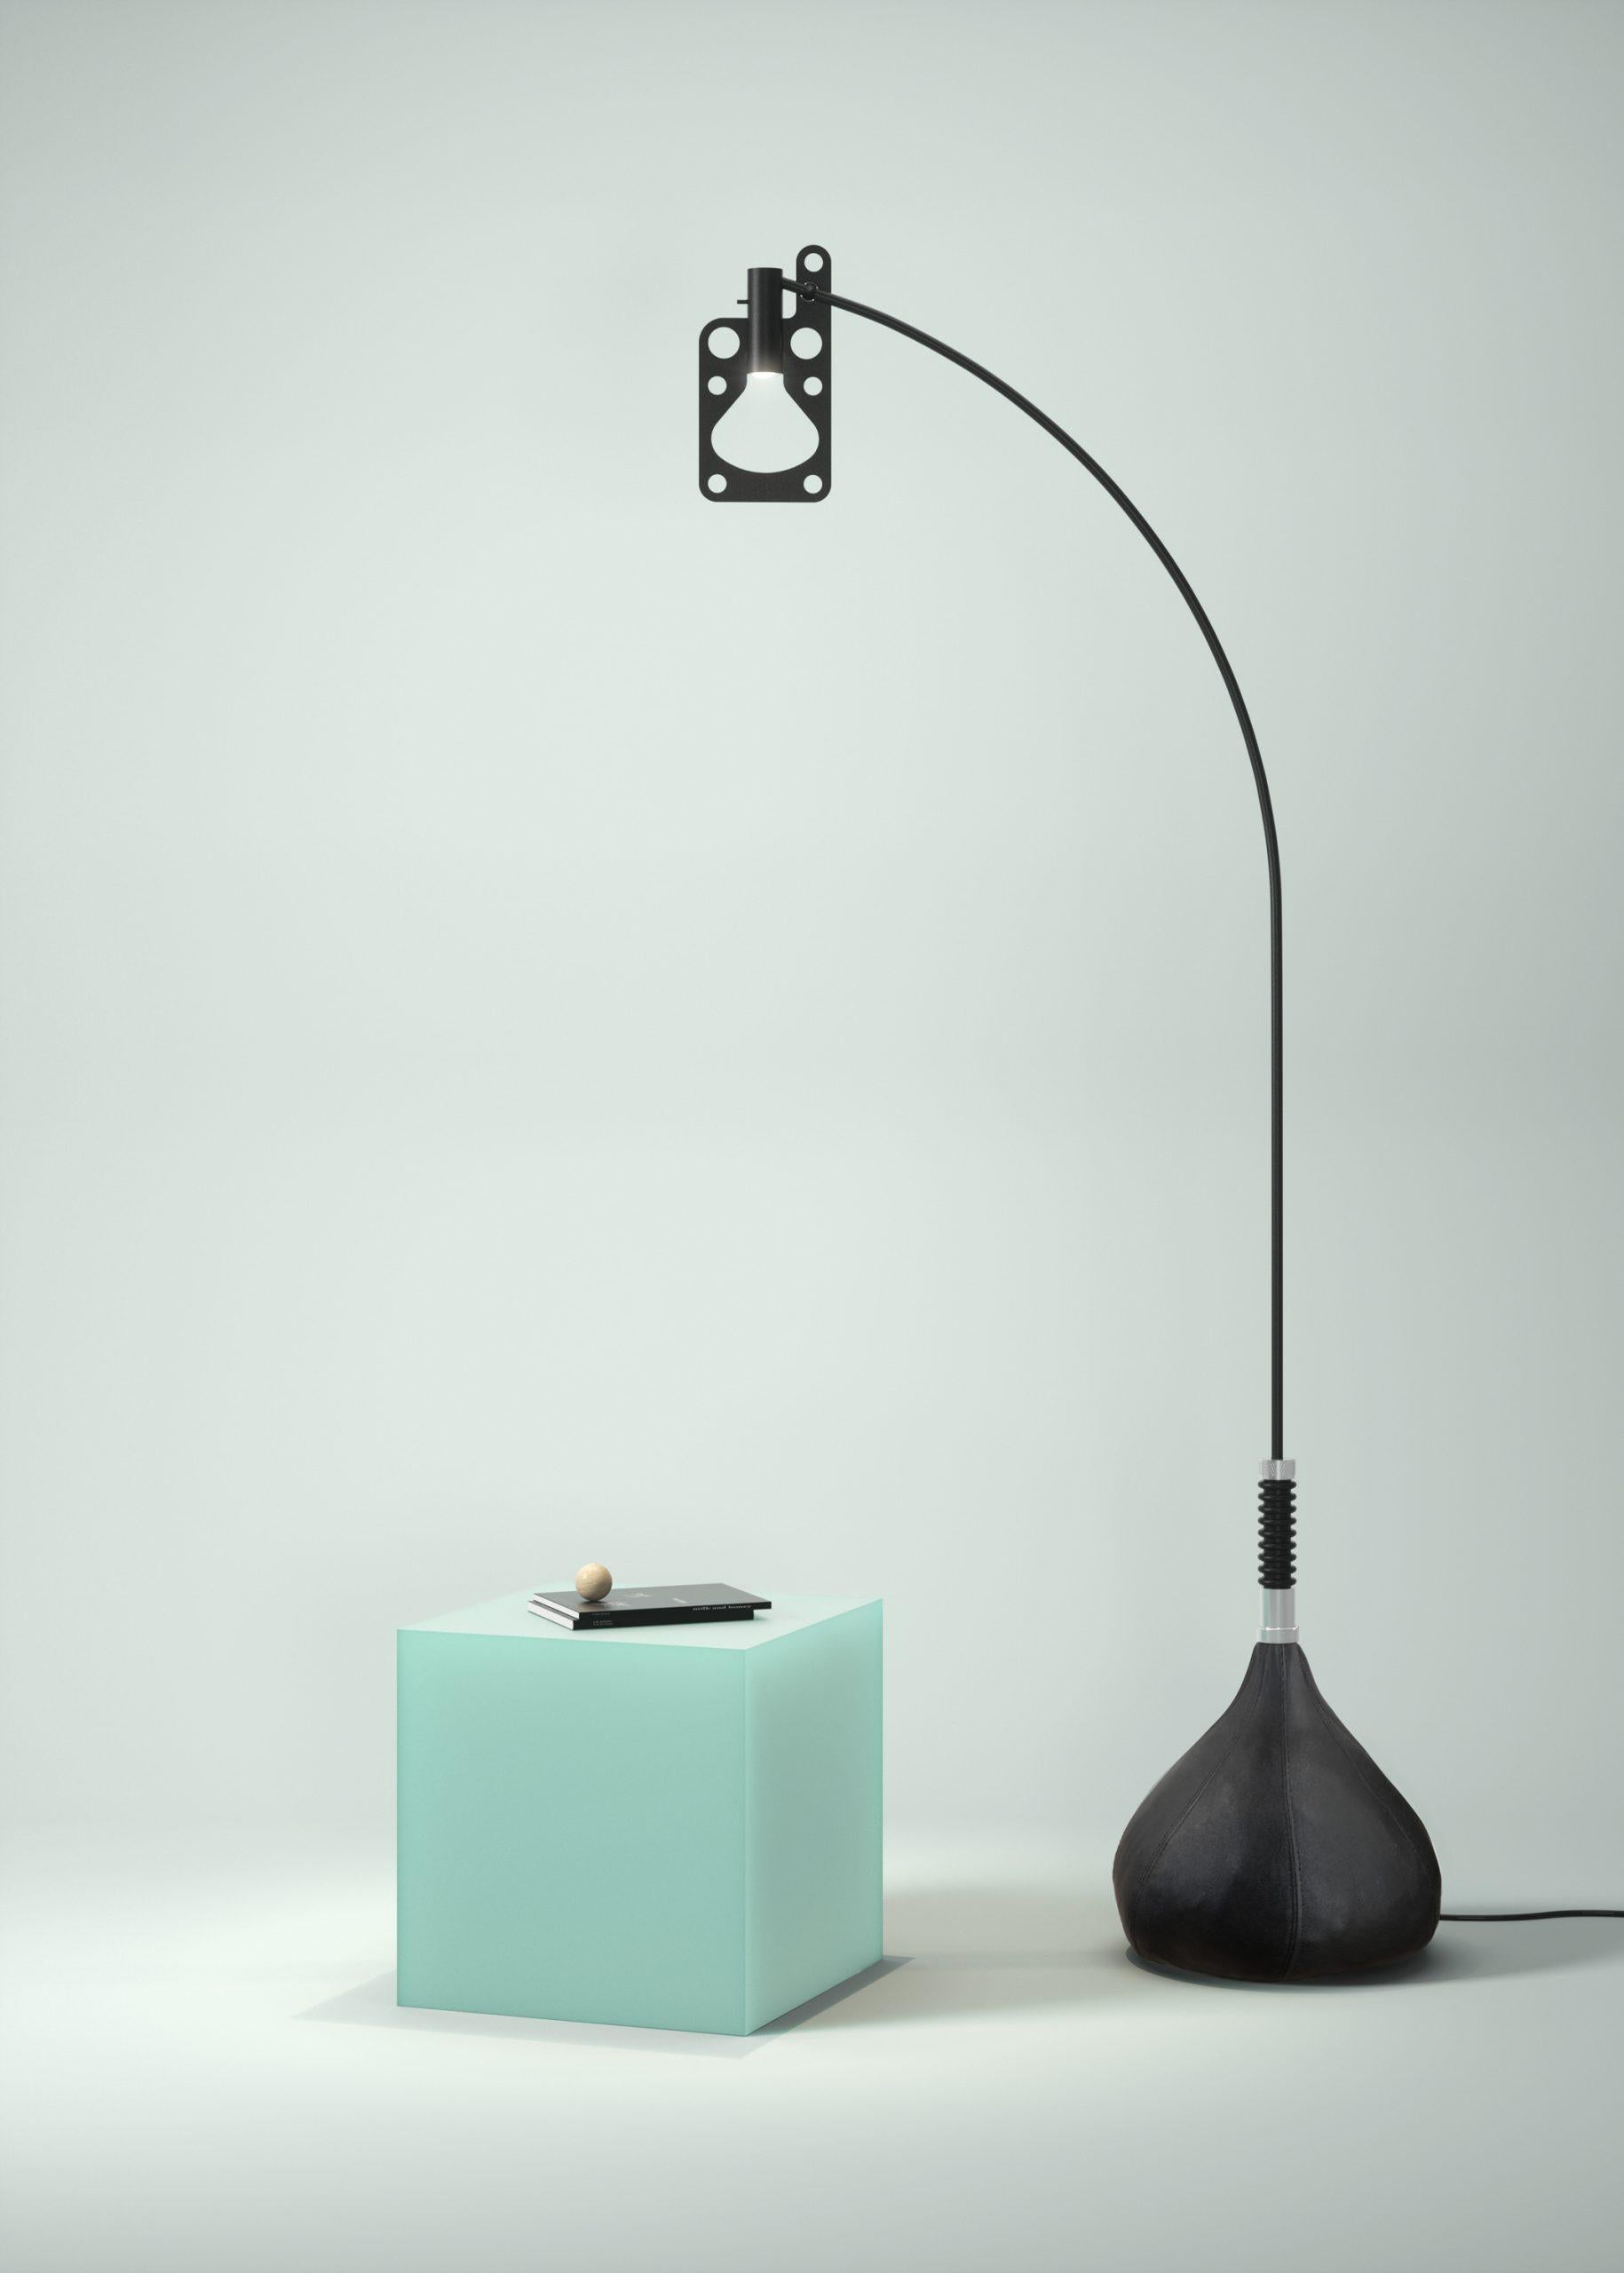 Axolight Bul-Bo Extra Large Floor Lamp in Black Metal and Fabric by Fabrizio Pellegrino and Lodovico Gabetti

In 2019, the architects Fabrizio Pellegrino and Lodovico Gabetti, together with Giuseppe Scaturro and Magdalena Kirova, respectively CEO